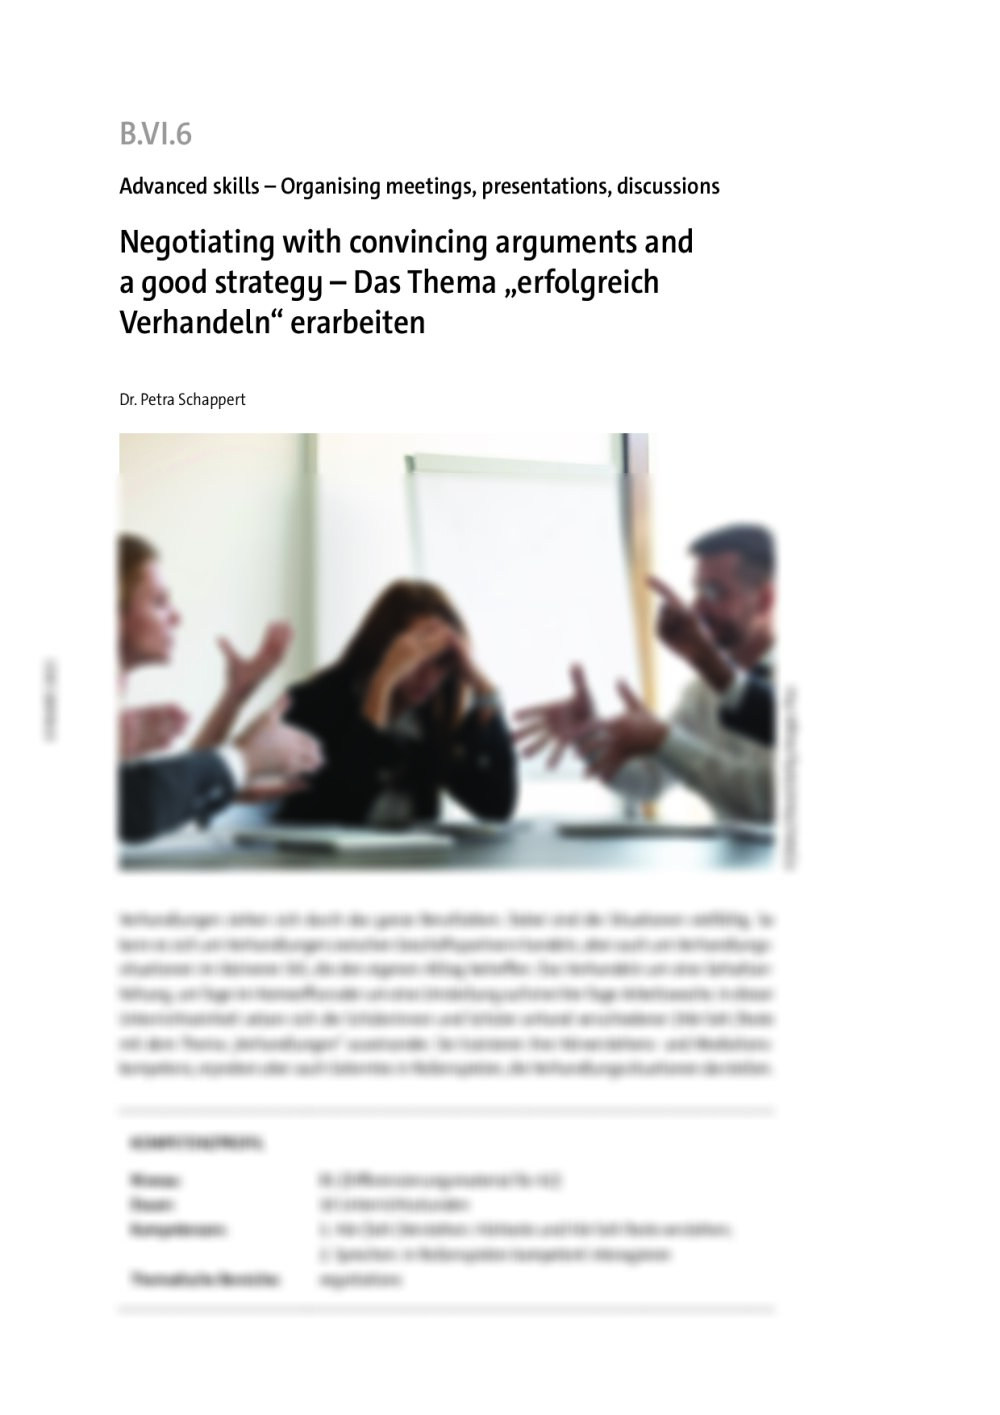 Negotiating with convincing arguments and a good strategy - Seite 1